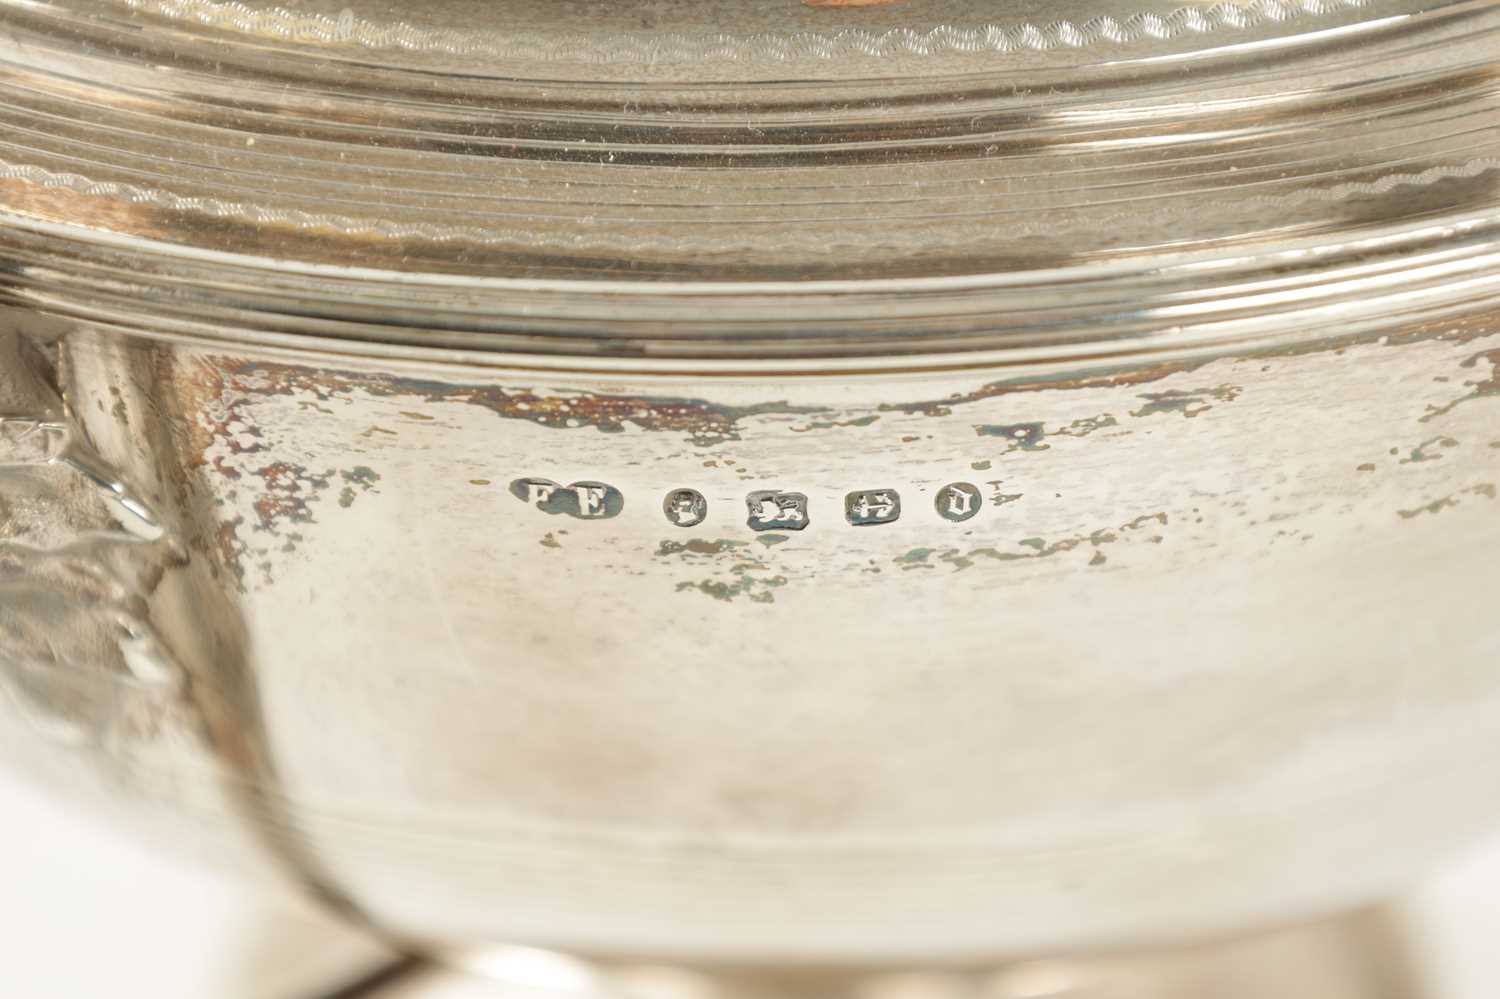 A LARGE LATE 19TH CENTURY SILVER SOUP TUREEN - Image 6 of 6